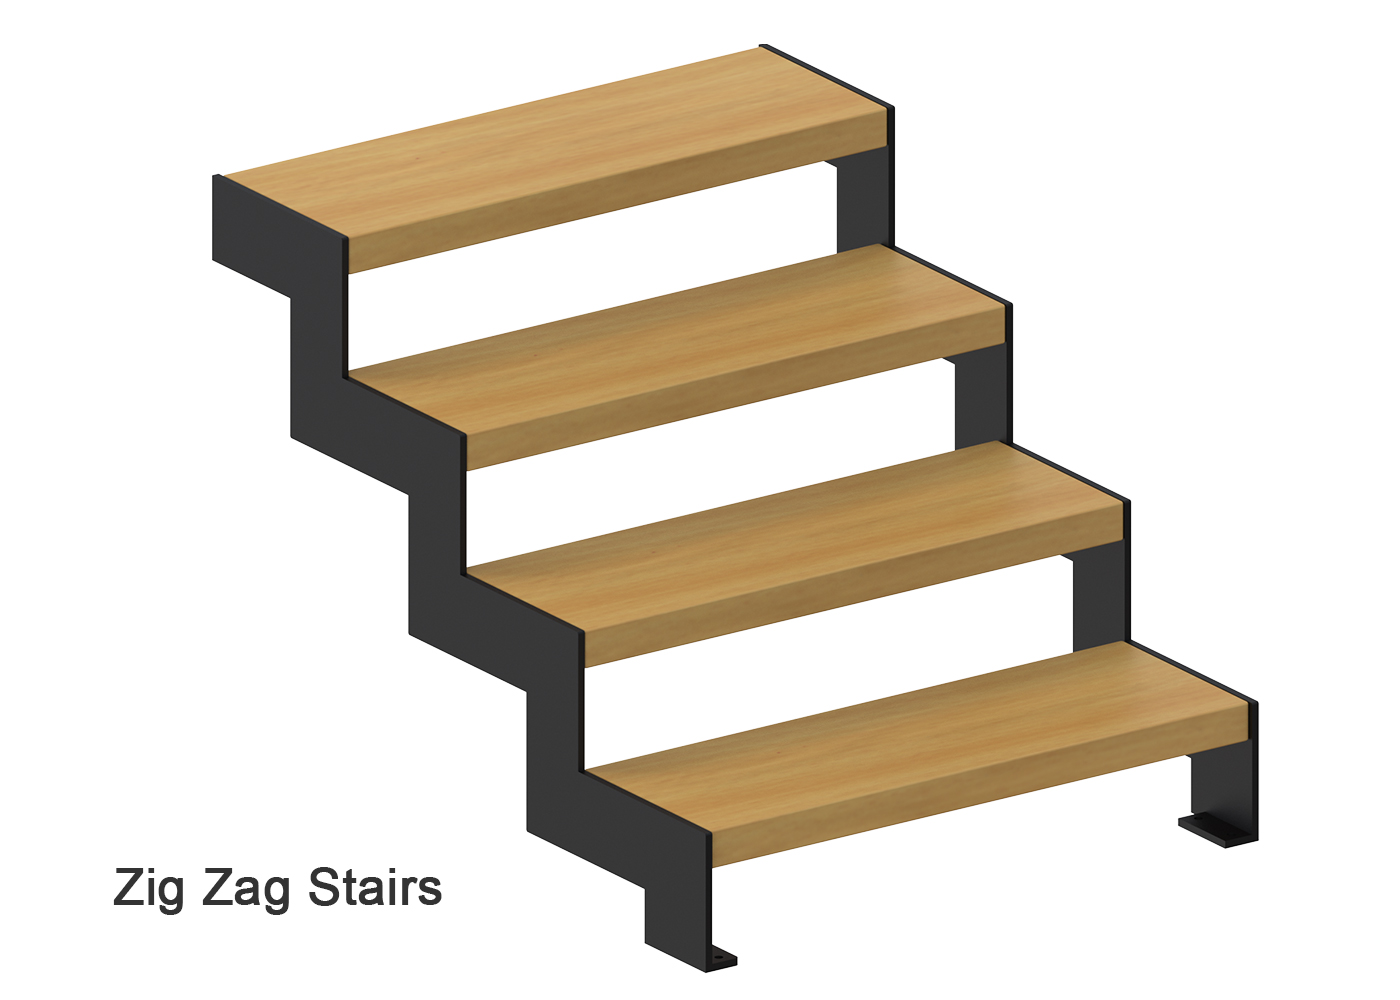 Scale a zigzag